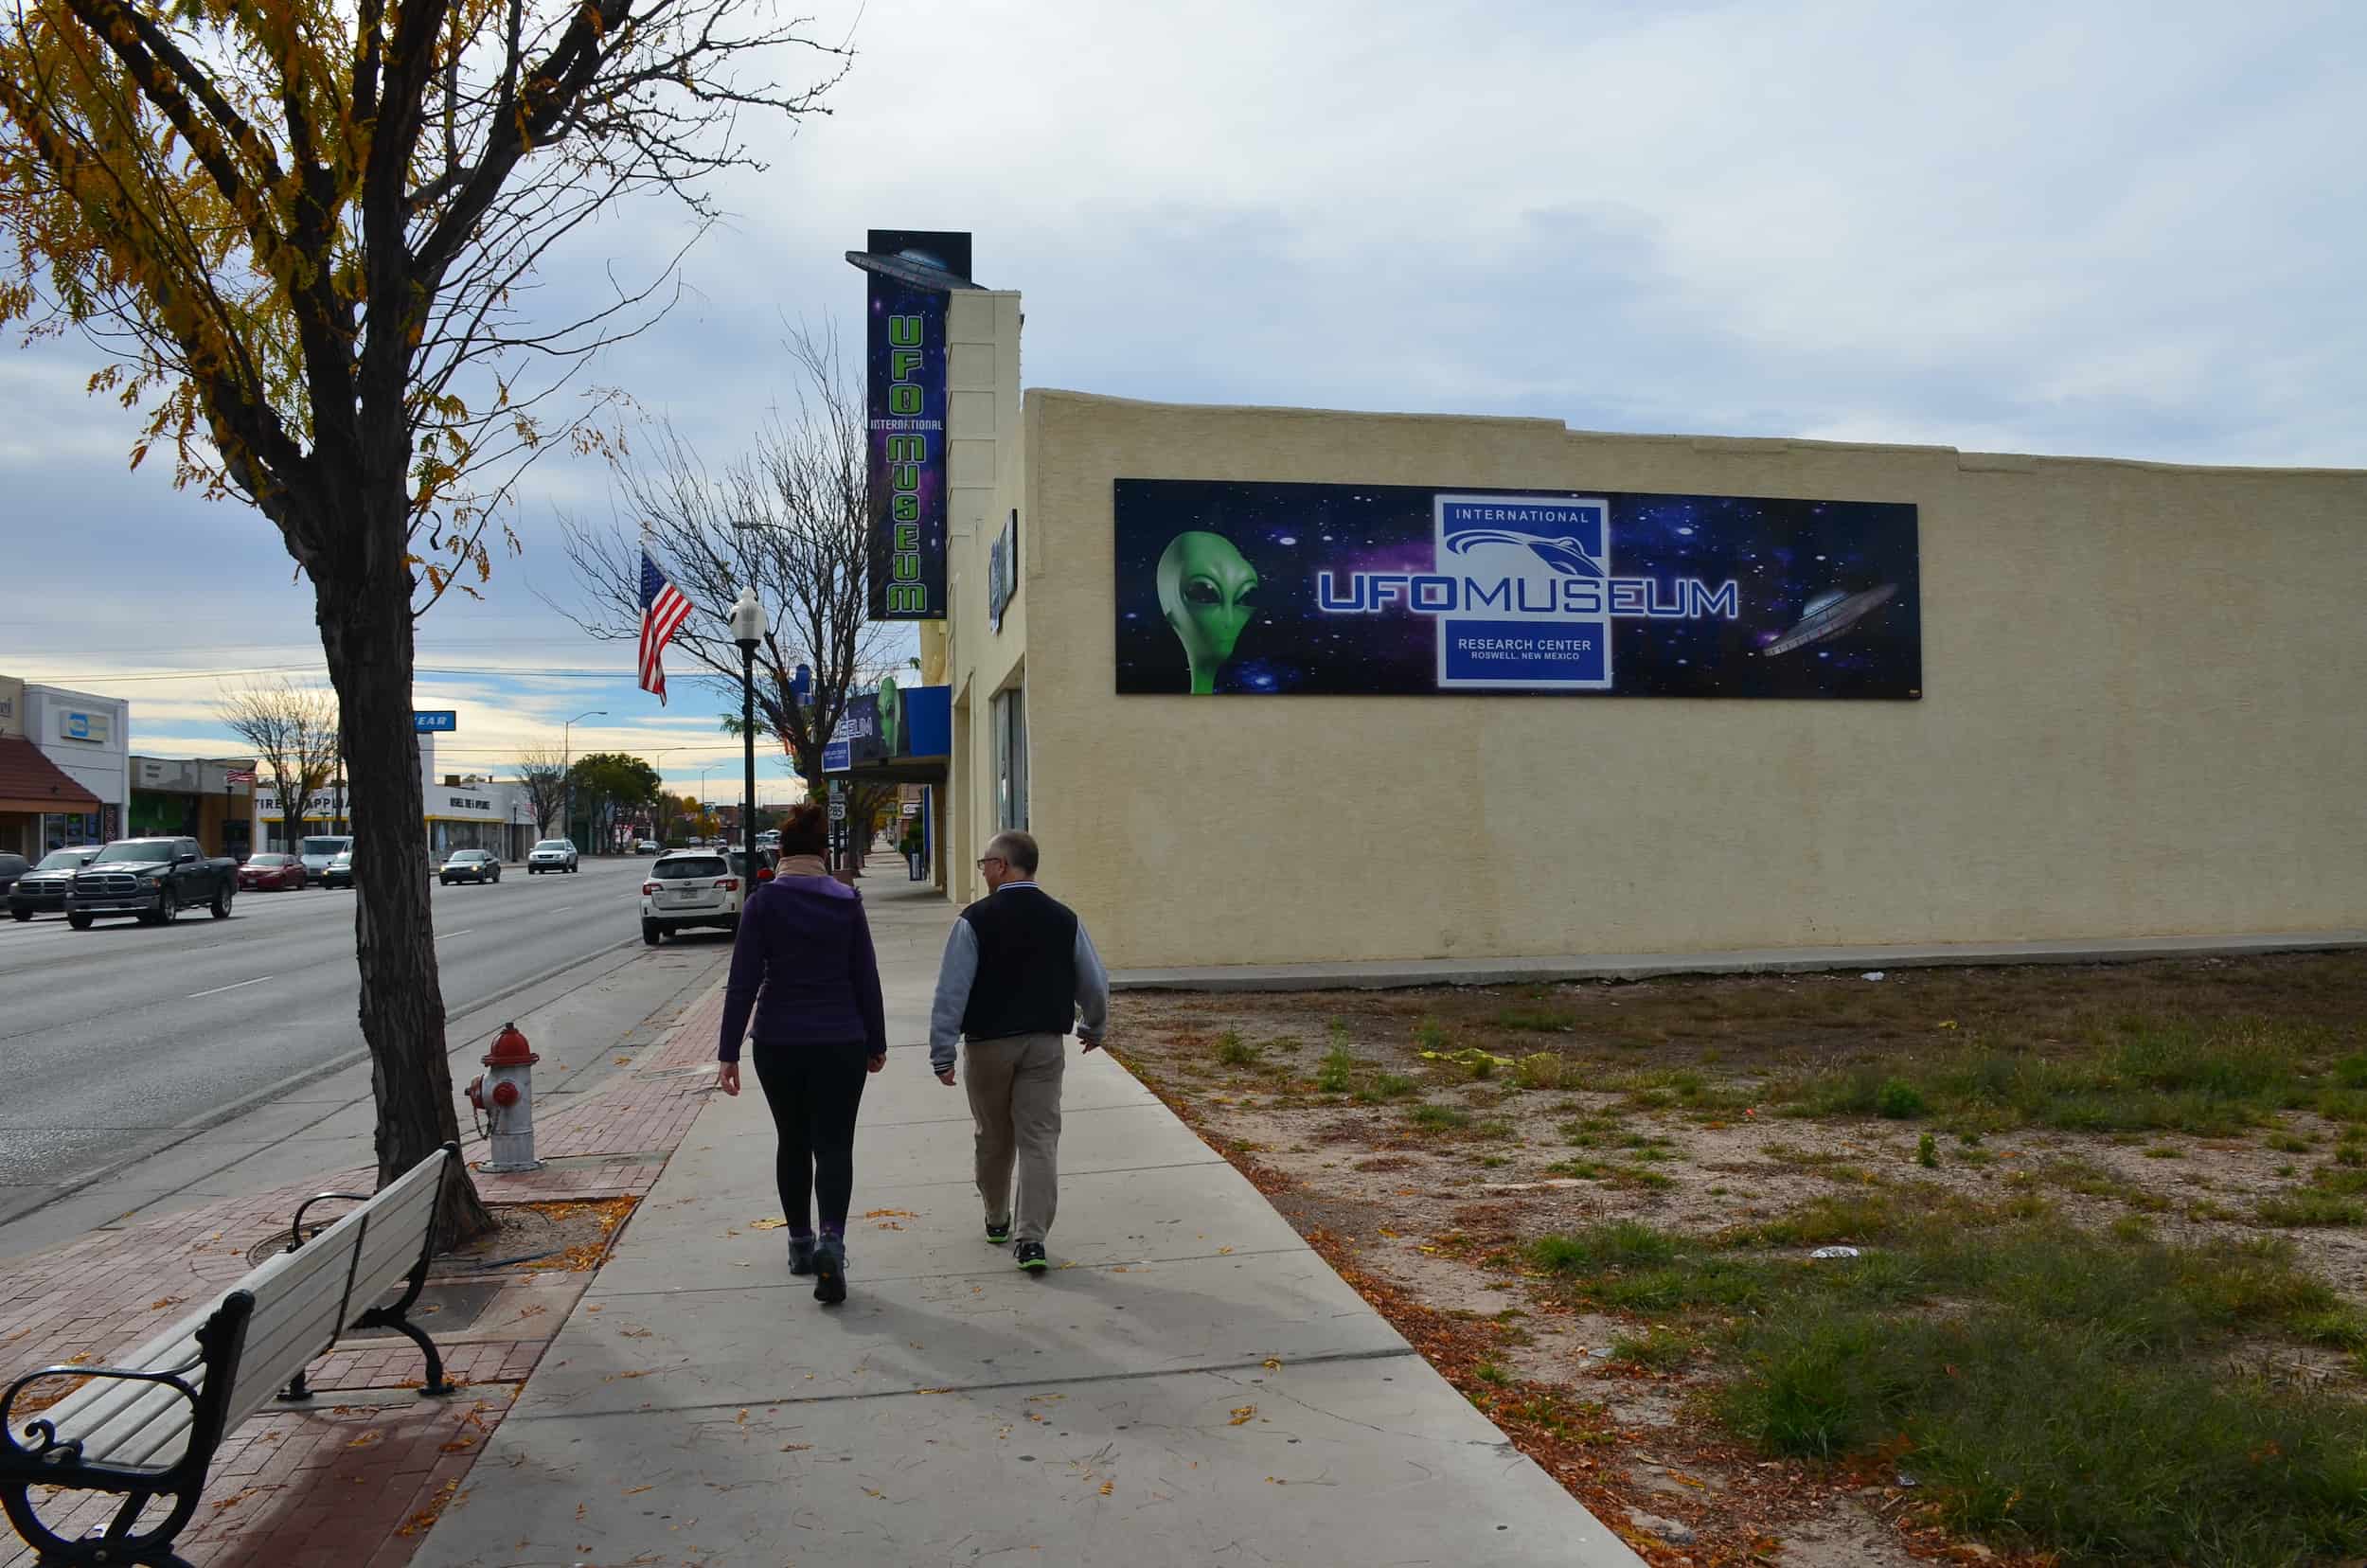 International UFO Museum and Research Center in Roswell, New Mexico